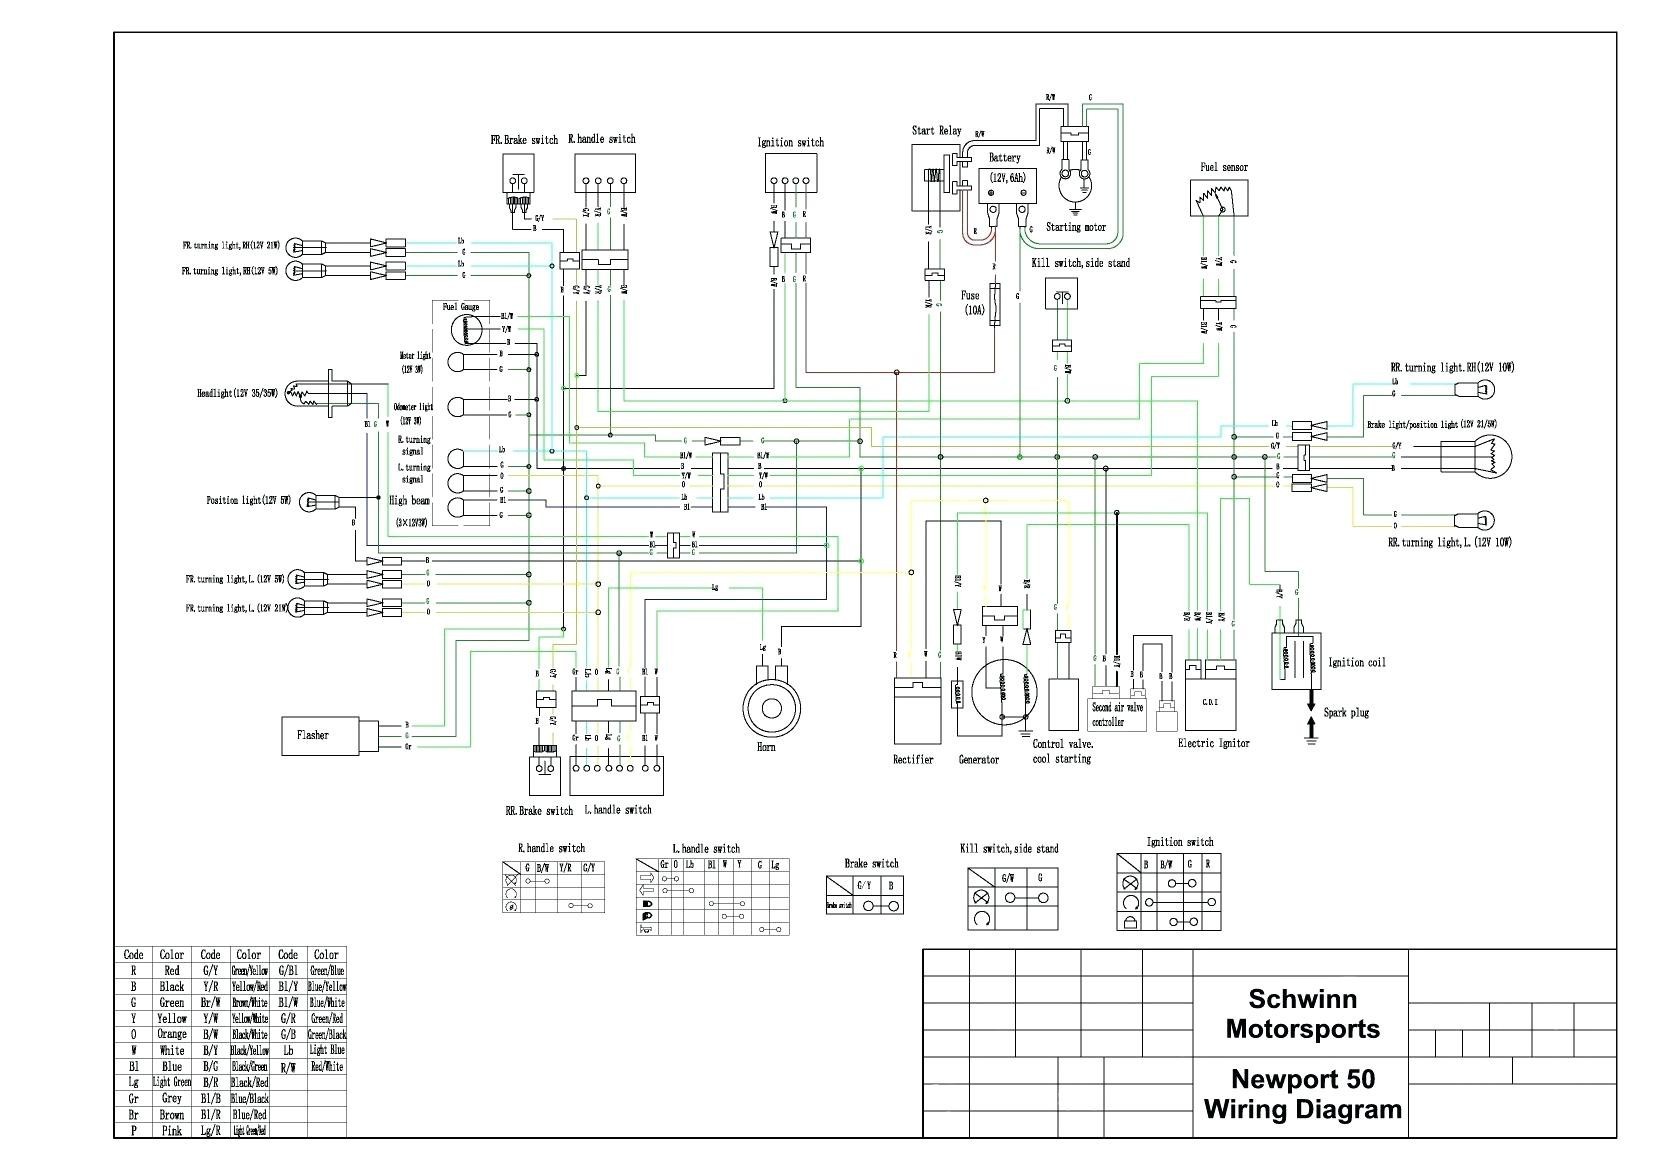 Zk2400 Dp Ld Rohs Wiring Diagram - Bike's Collection and Info